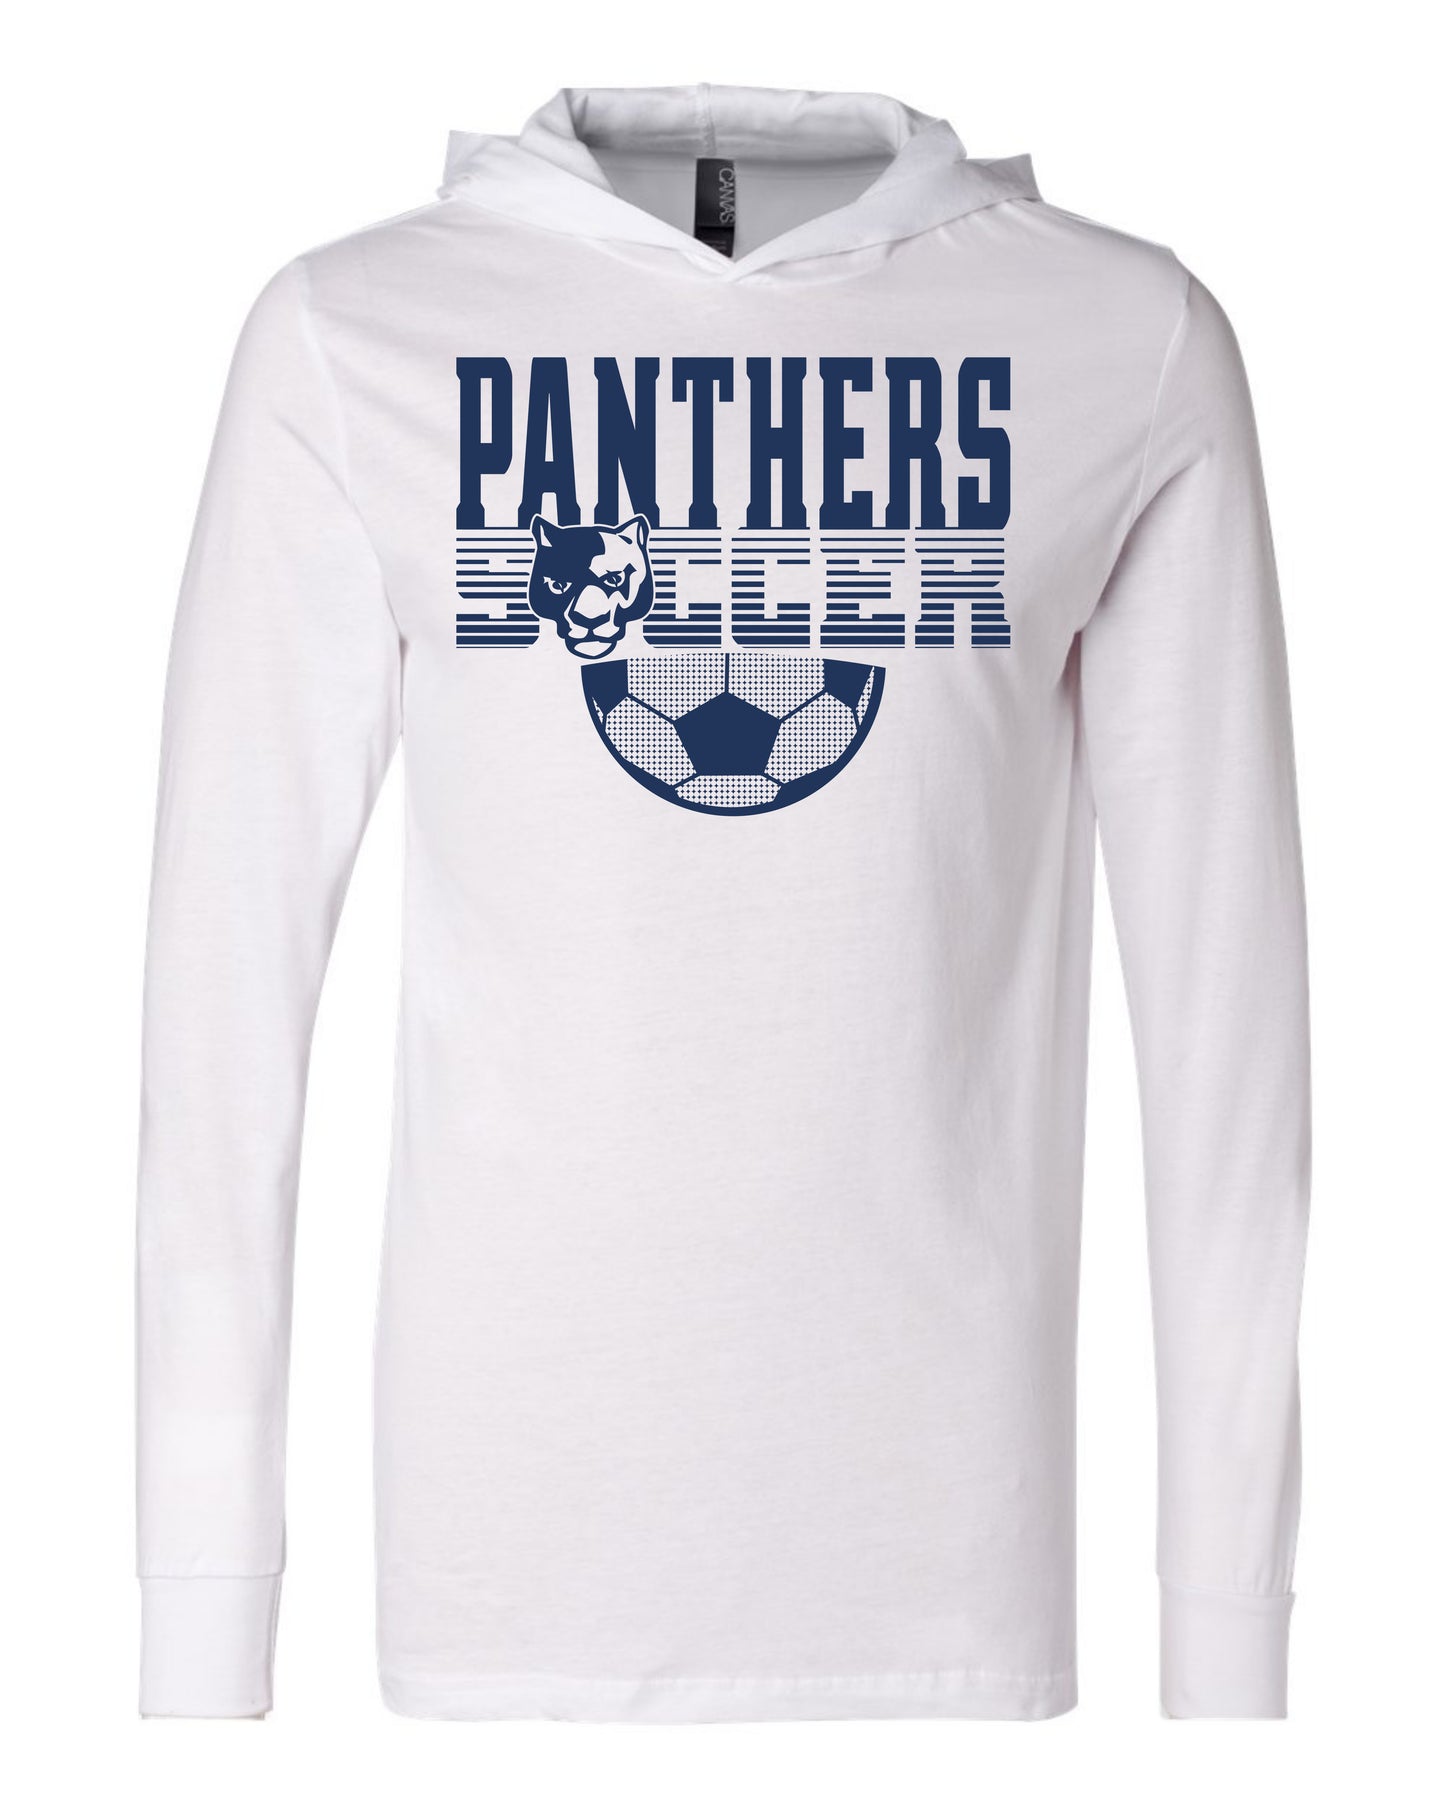 Panthers Soccer Faded - Adult Hooded Long Sleeve